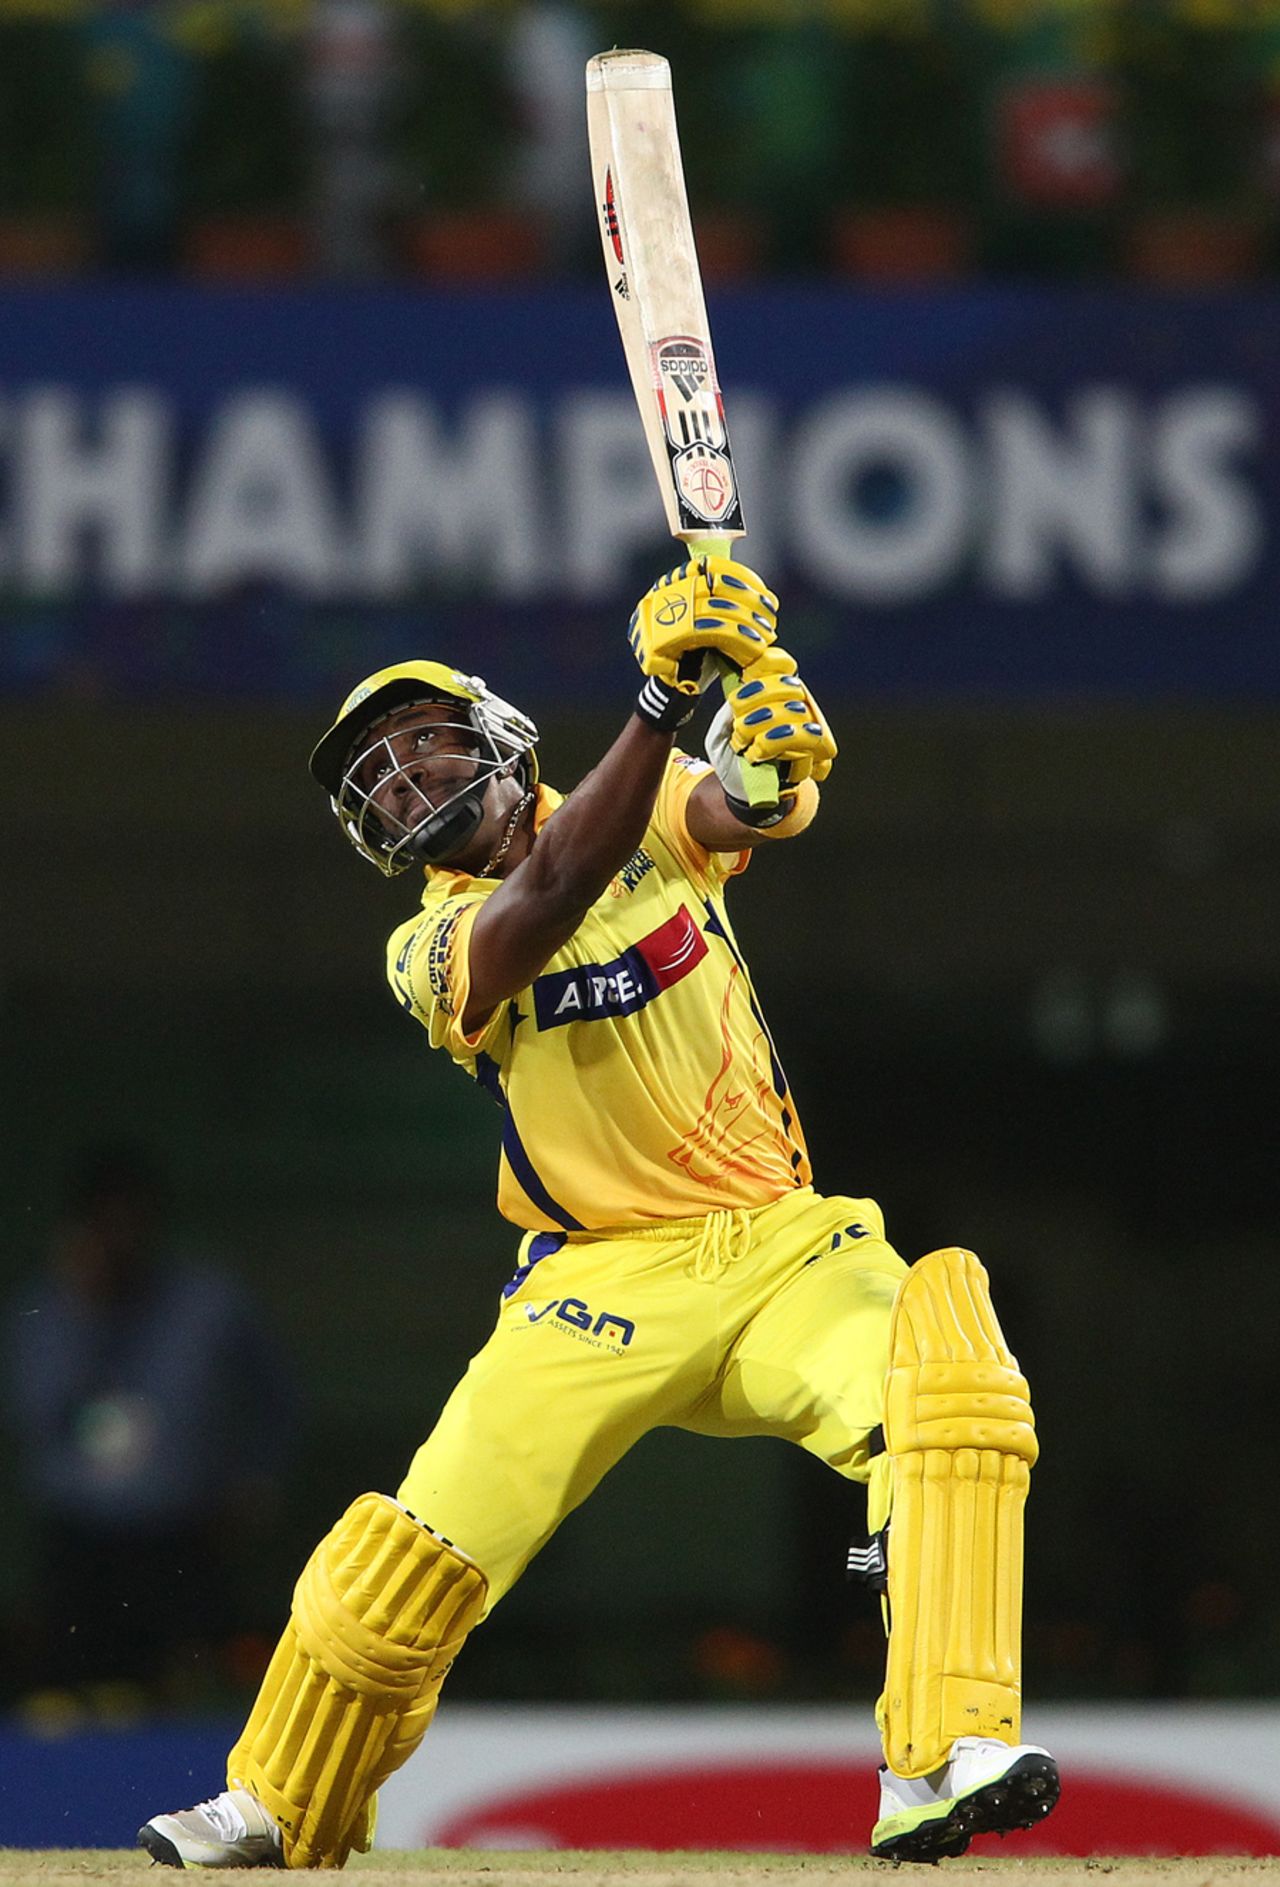 Dwayne Bravo hit his trademark sixes over extra cover during a cameo, Chennai Super Kings v Titans, Champions League 2013, Group B, Ranchi, September 22, 2013